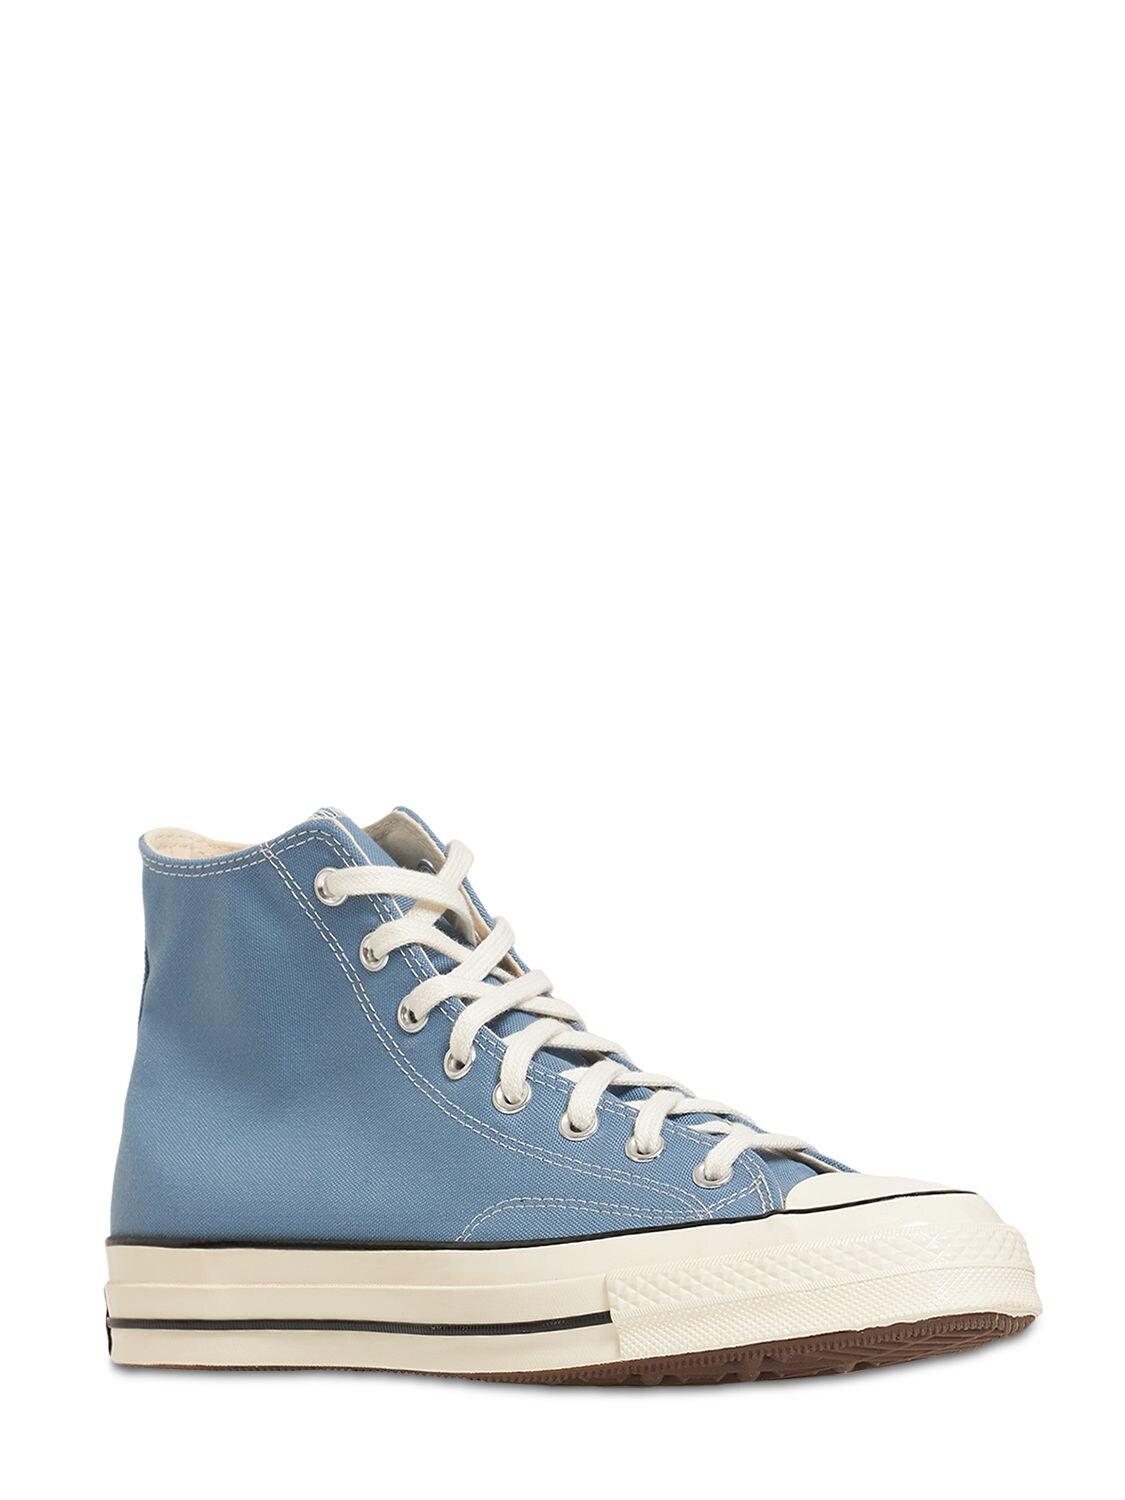 Converse Chuck 70 Recycled Canvas Sneakers in Blue for Men | Lyst